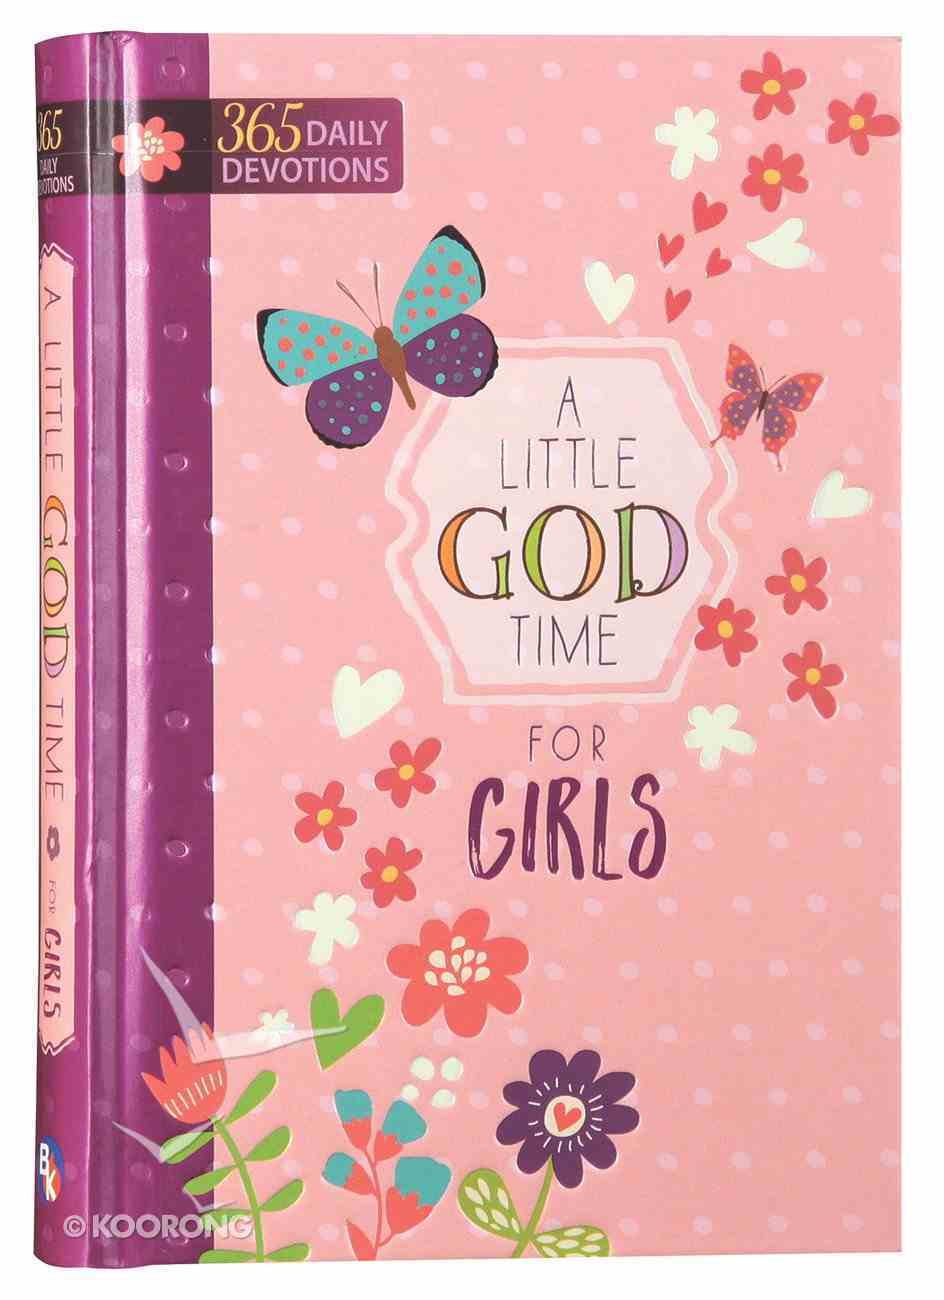 Little God Time For Girls, A: 365 Daily Devotions (365 Daily Devotions Series) Hardback